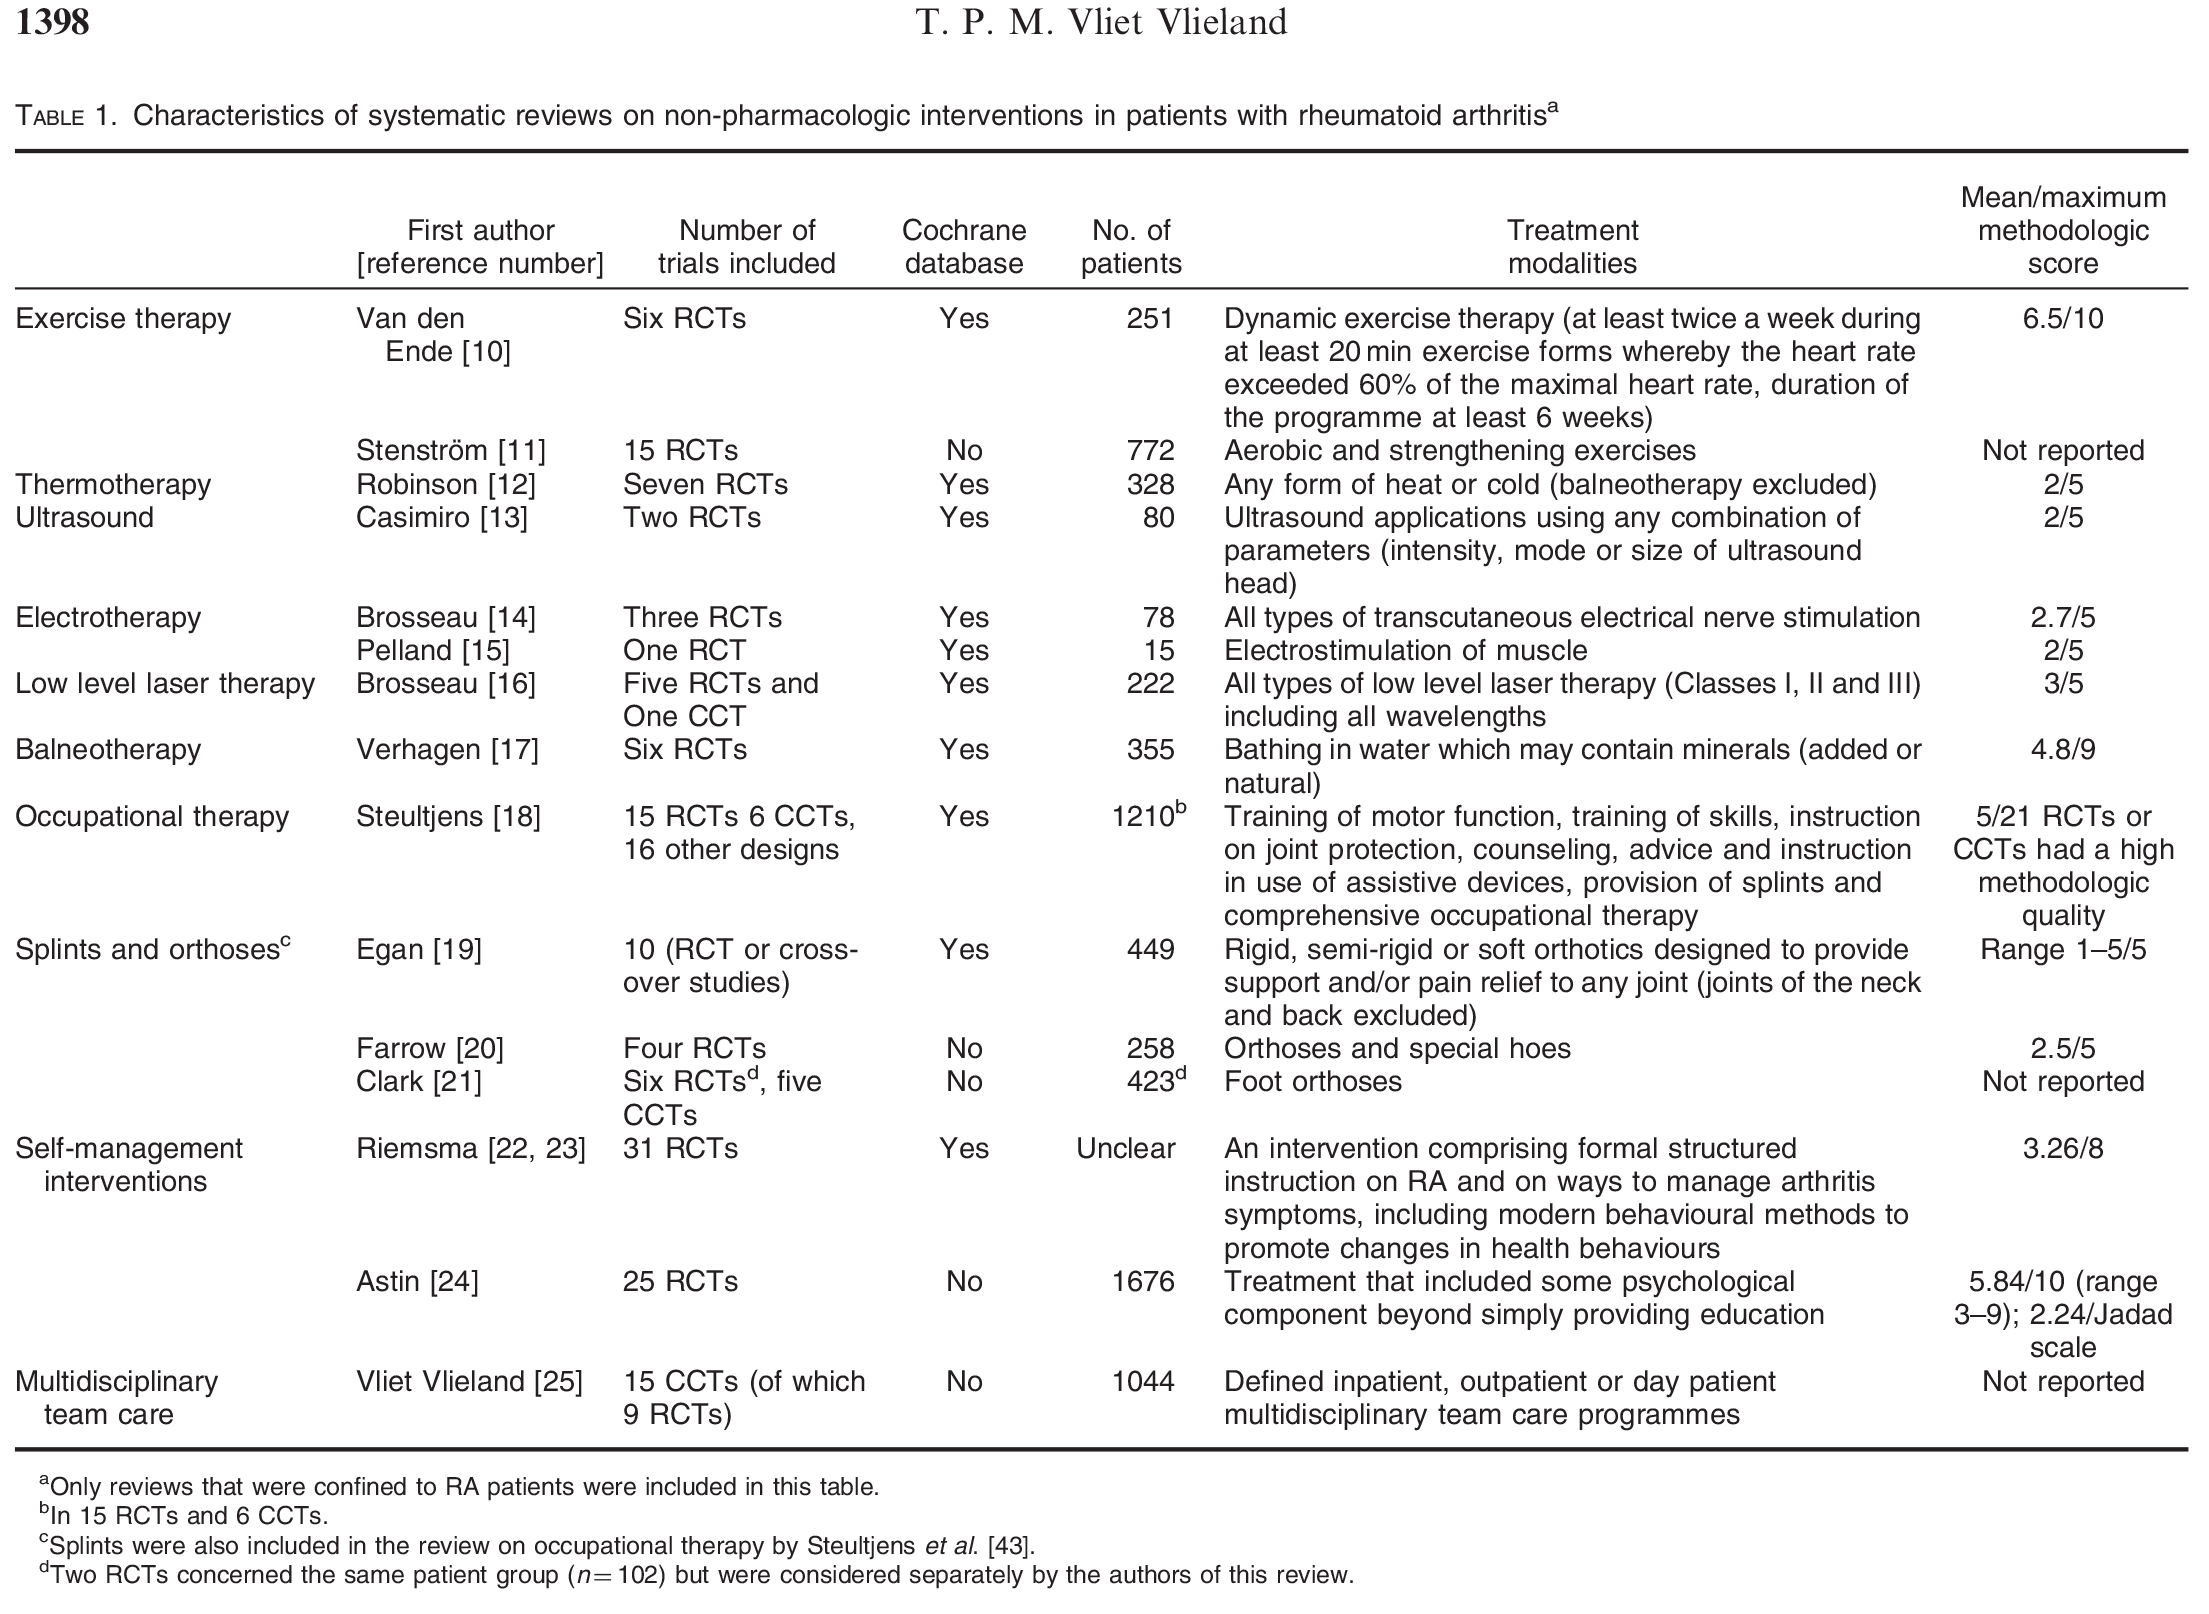 https://chillcryotherapy.net/wp-content/uploads/2019/03/RA-table1.png